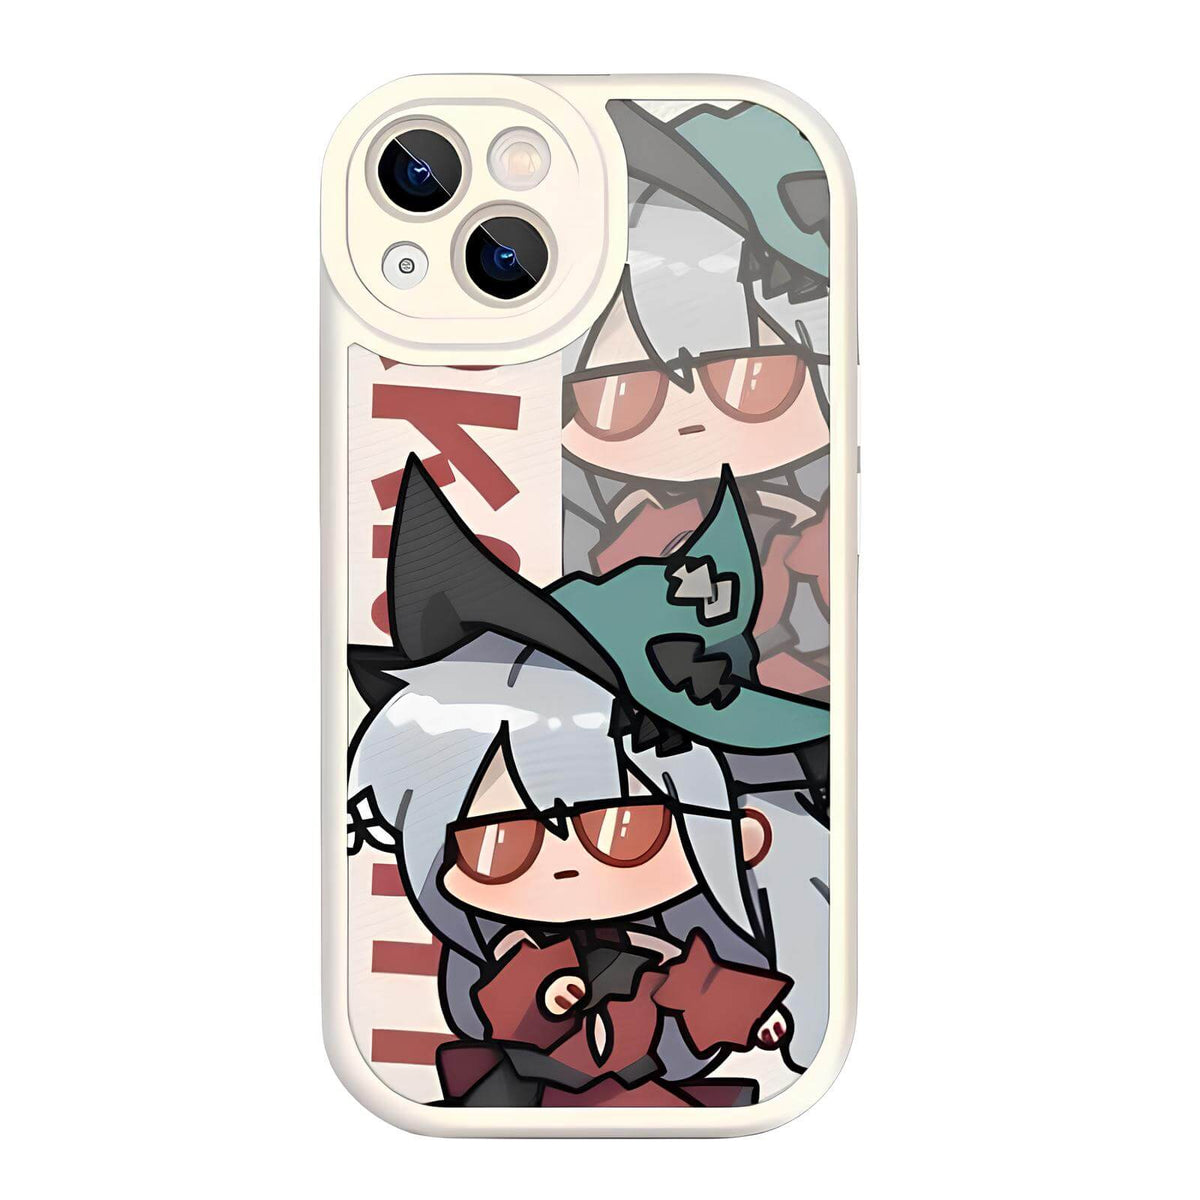 Arknights Skadi the Corrupting Heart style phone case